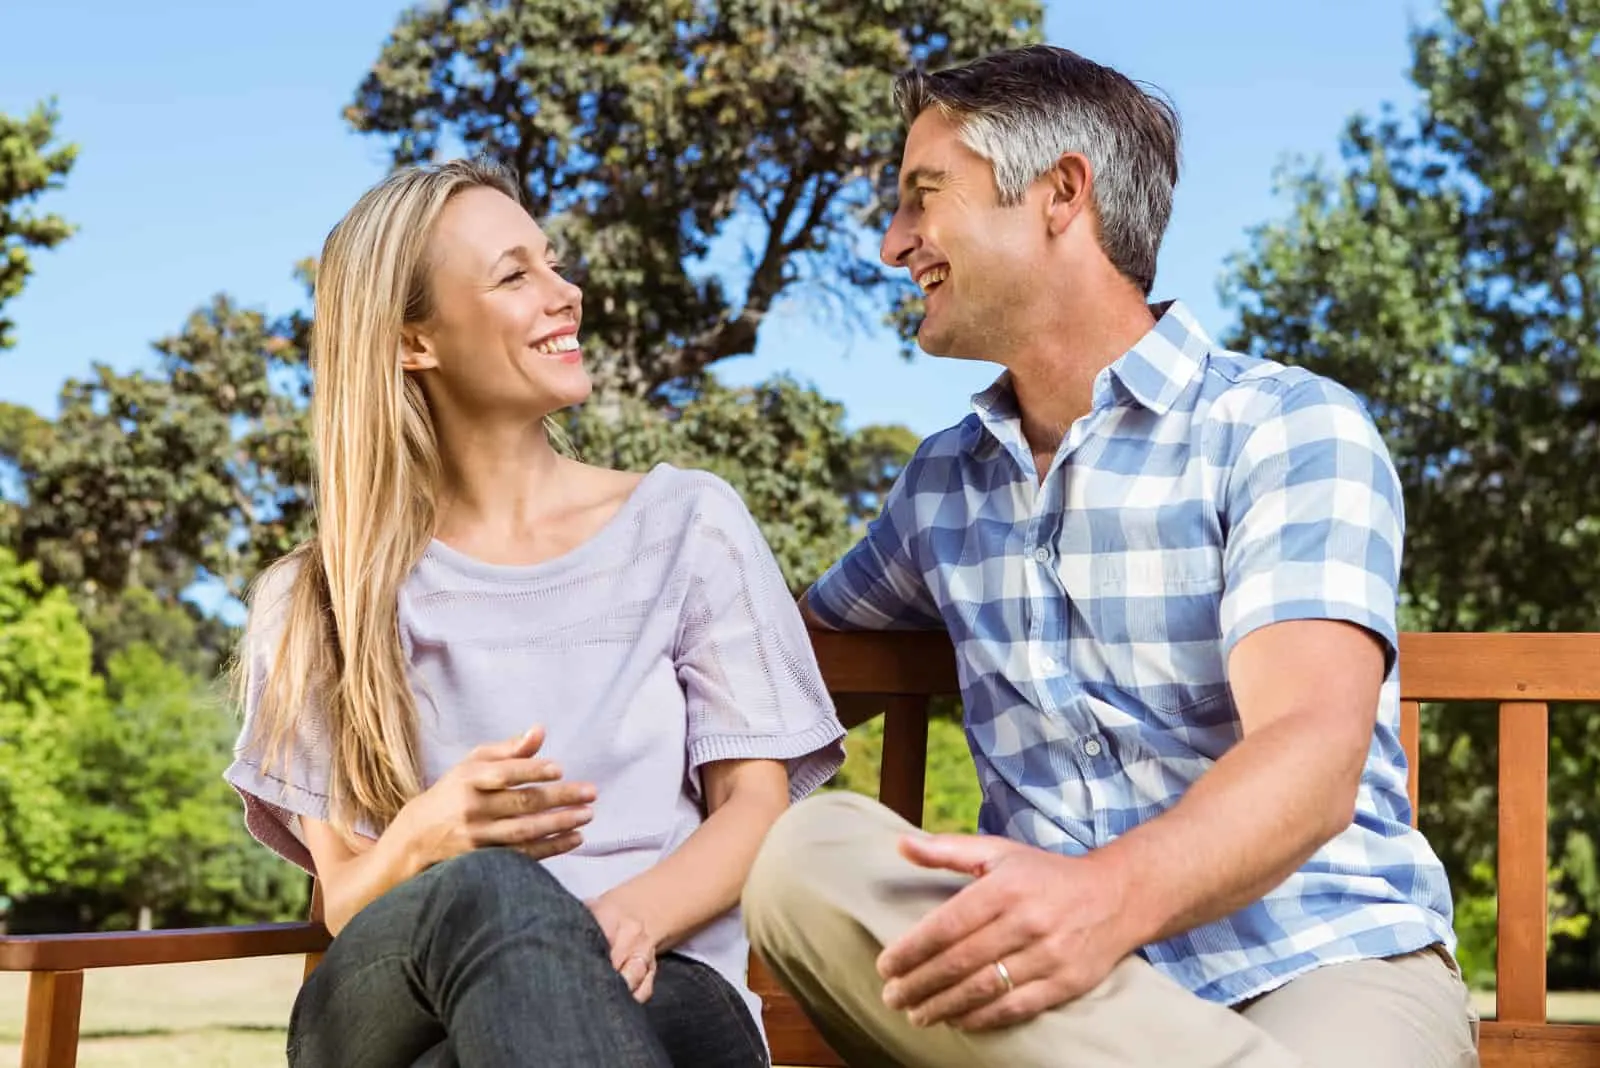 a smiling man and woman talking on a bench